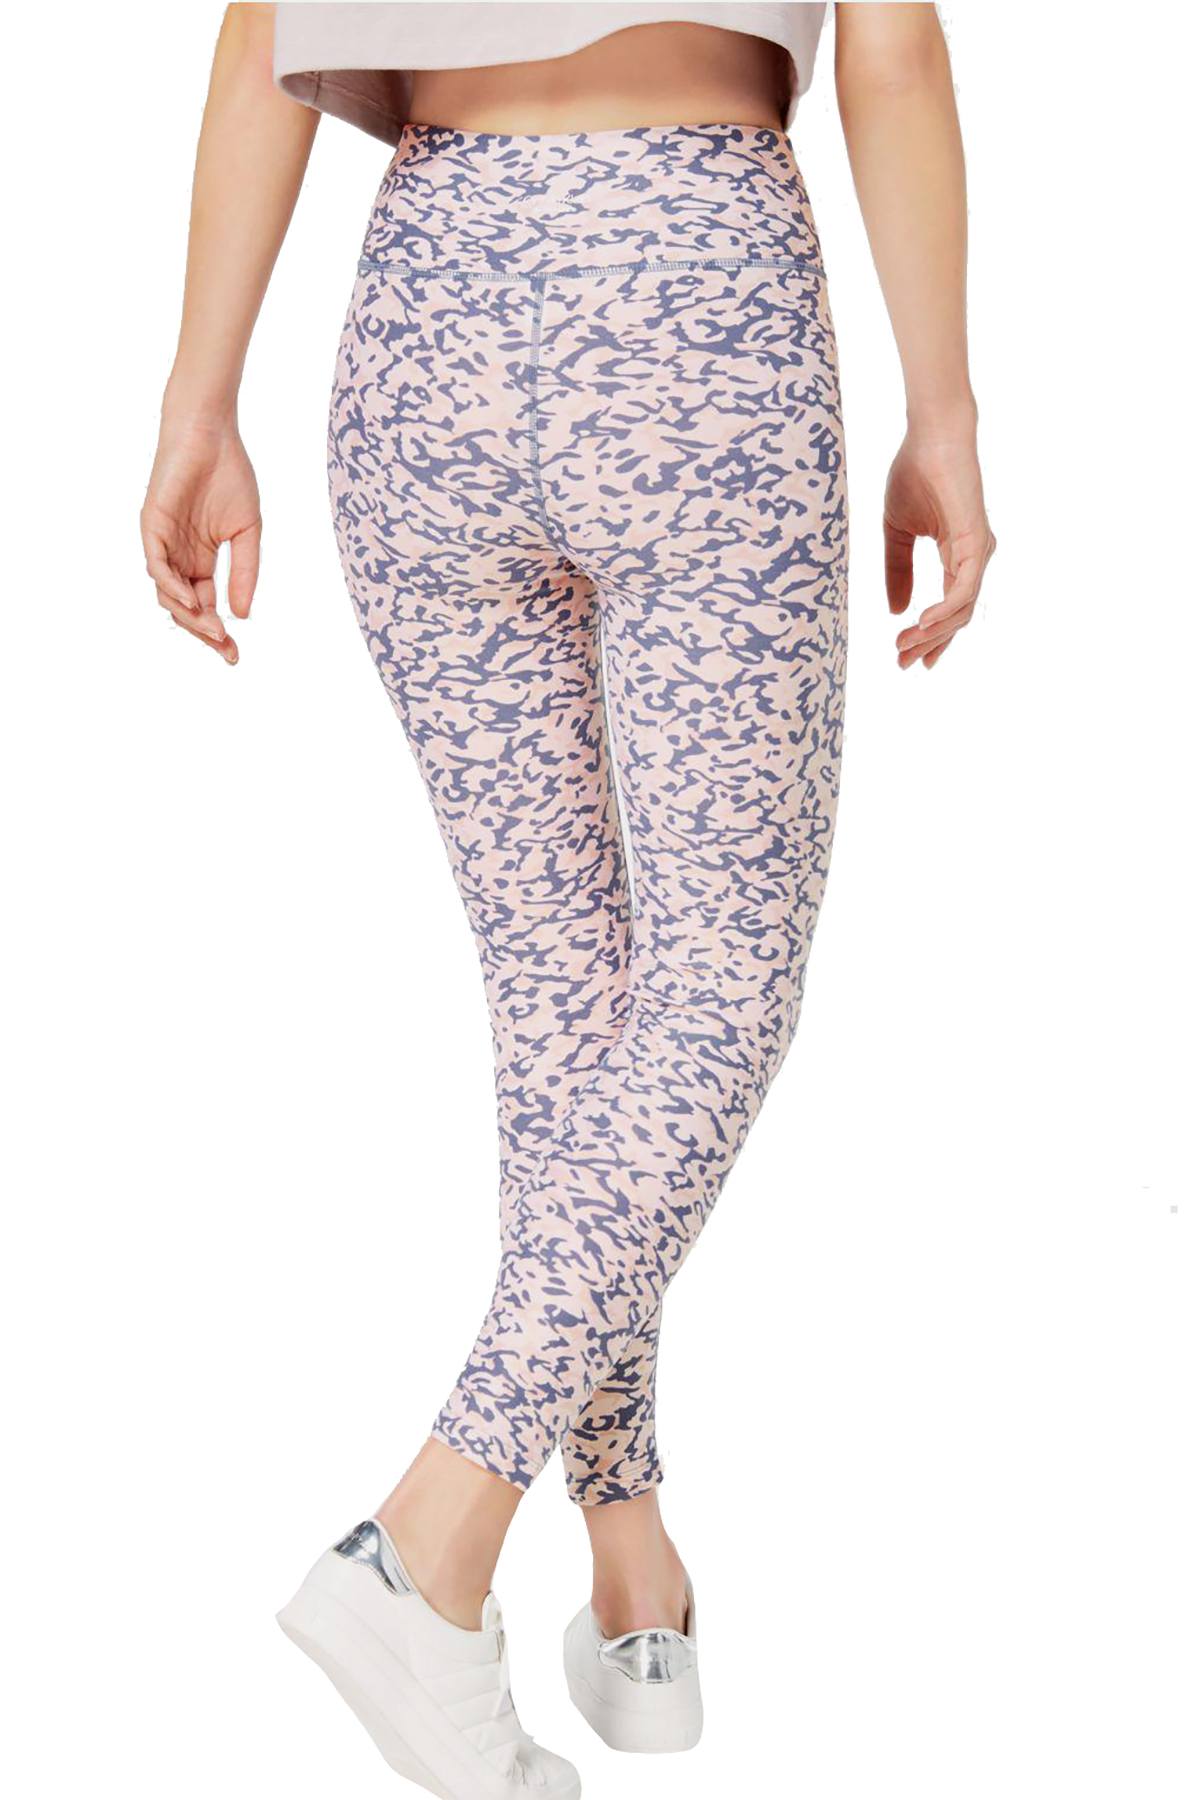 Buy Orchid & Blue Ankle Length Combo Leggings- Jointlook.com/shop